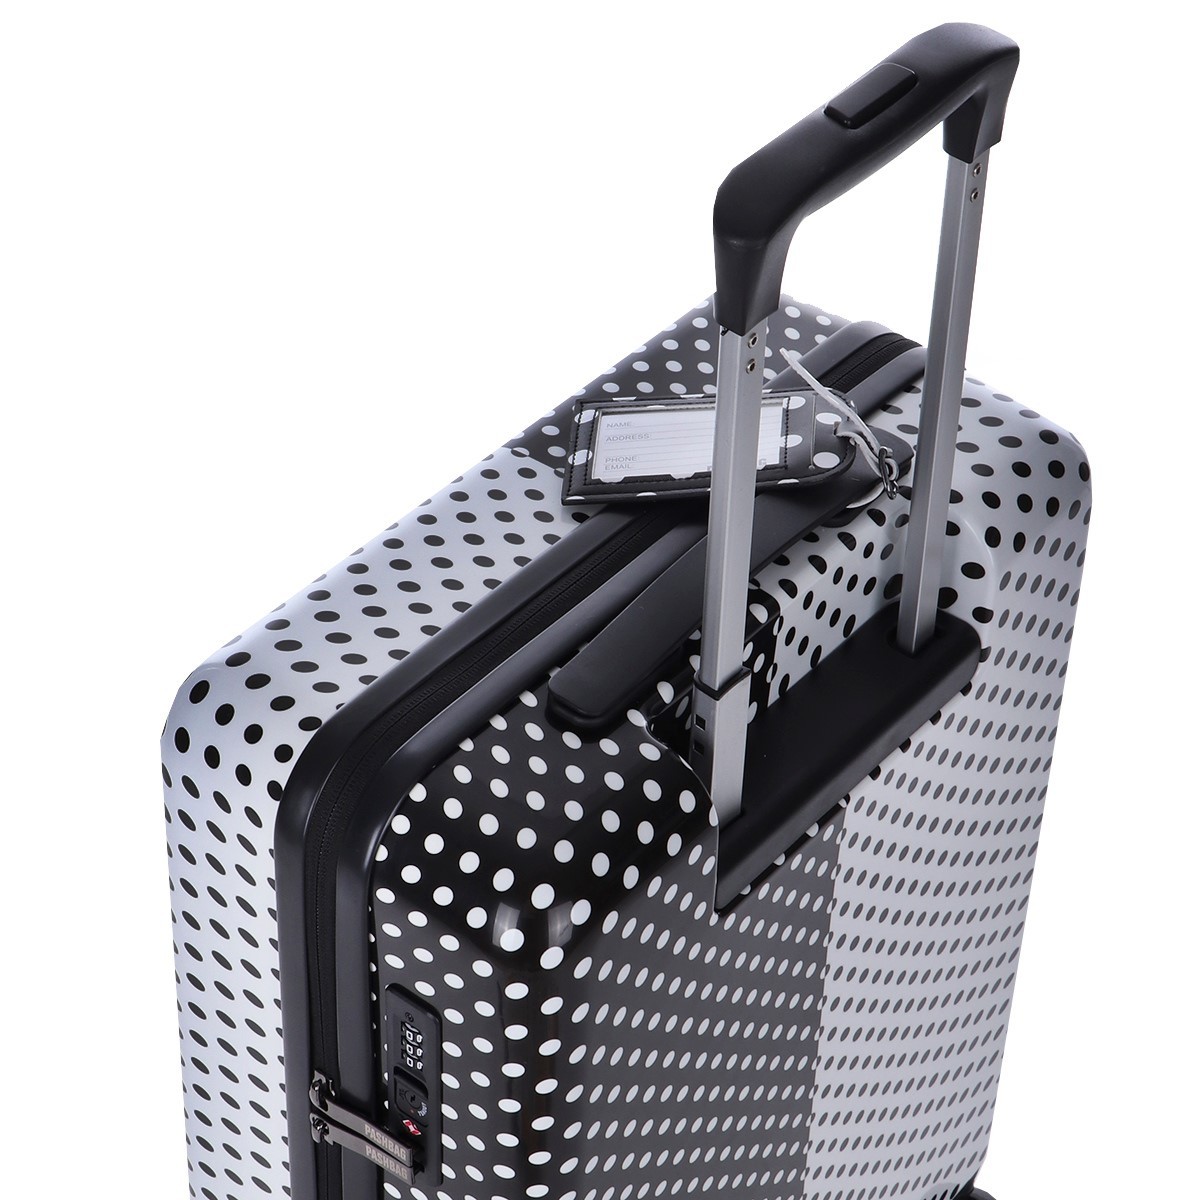 Pash bag Spinner cabina 4 ruote Bianco/nero The one TROLLEY